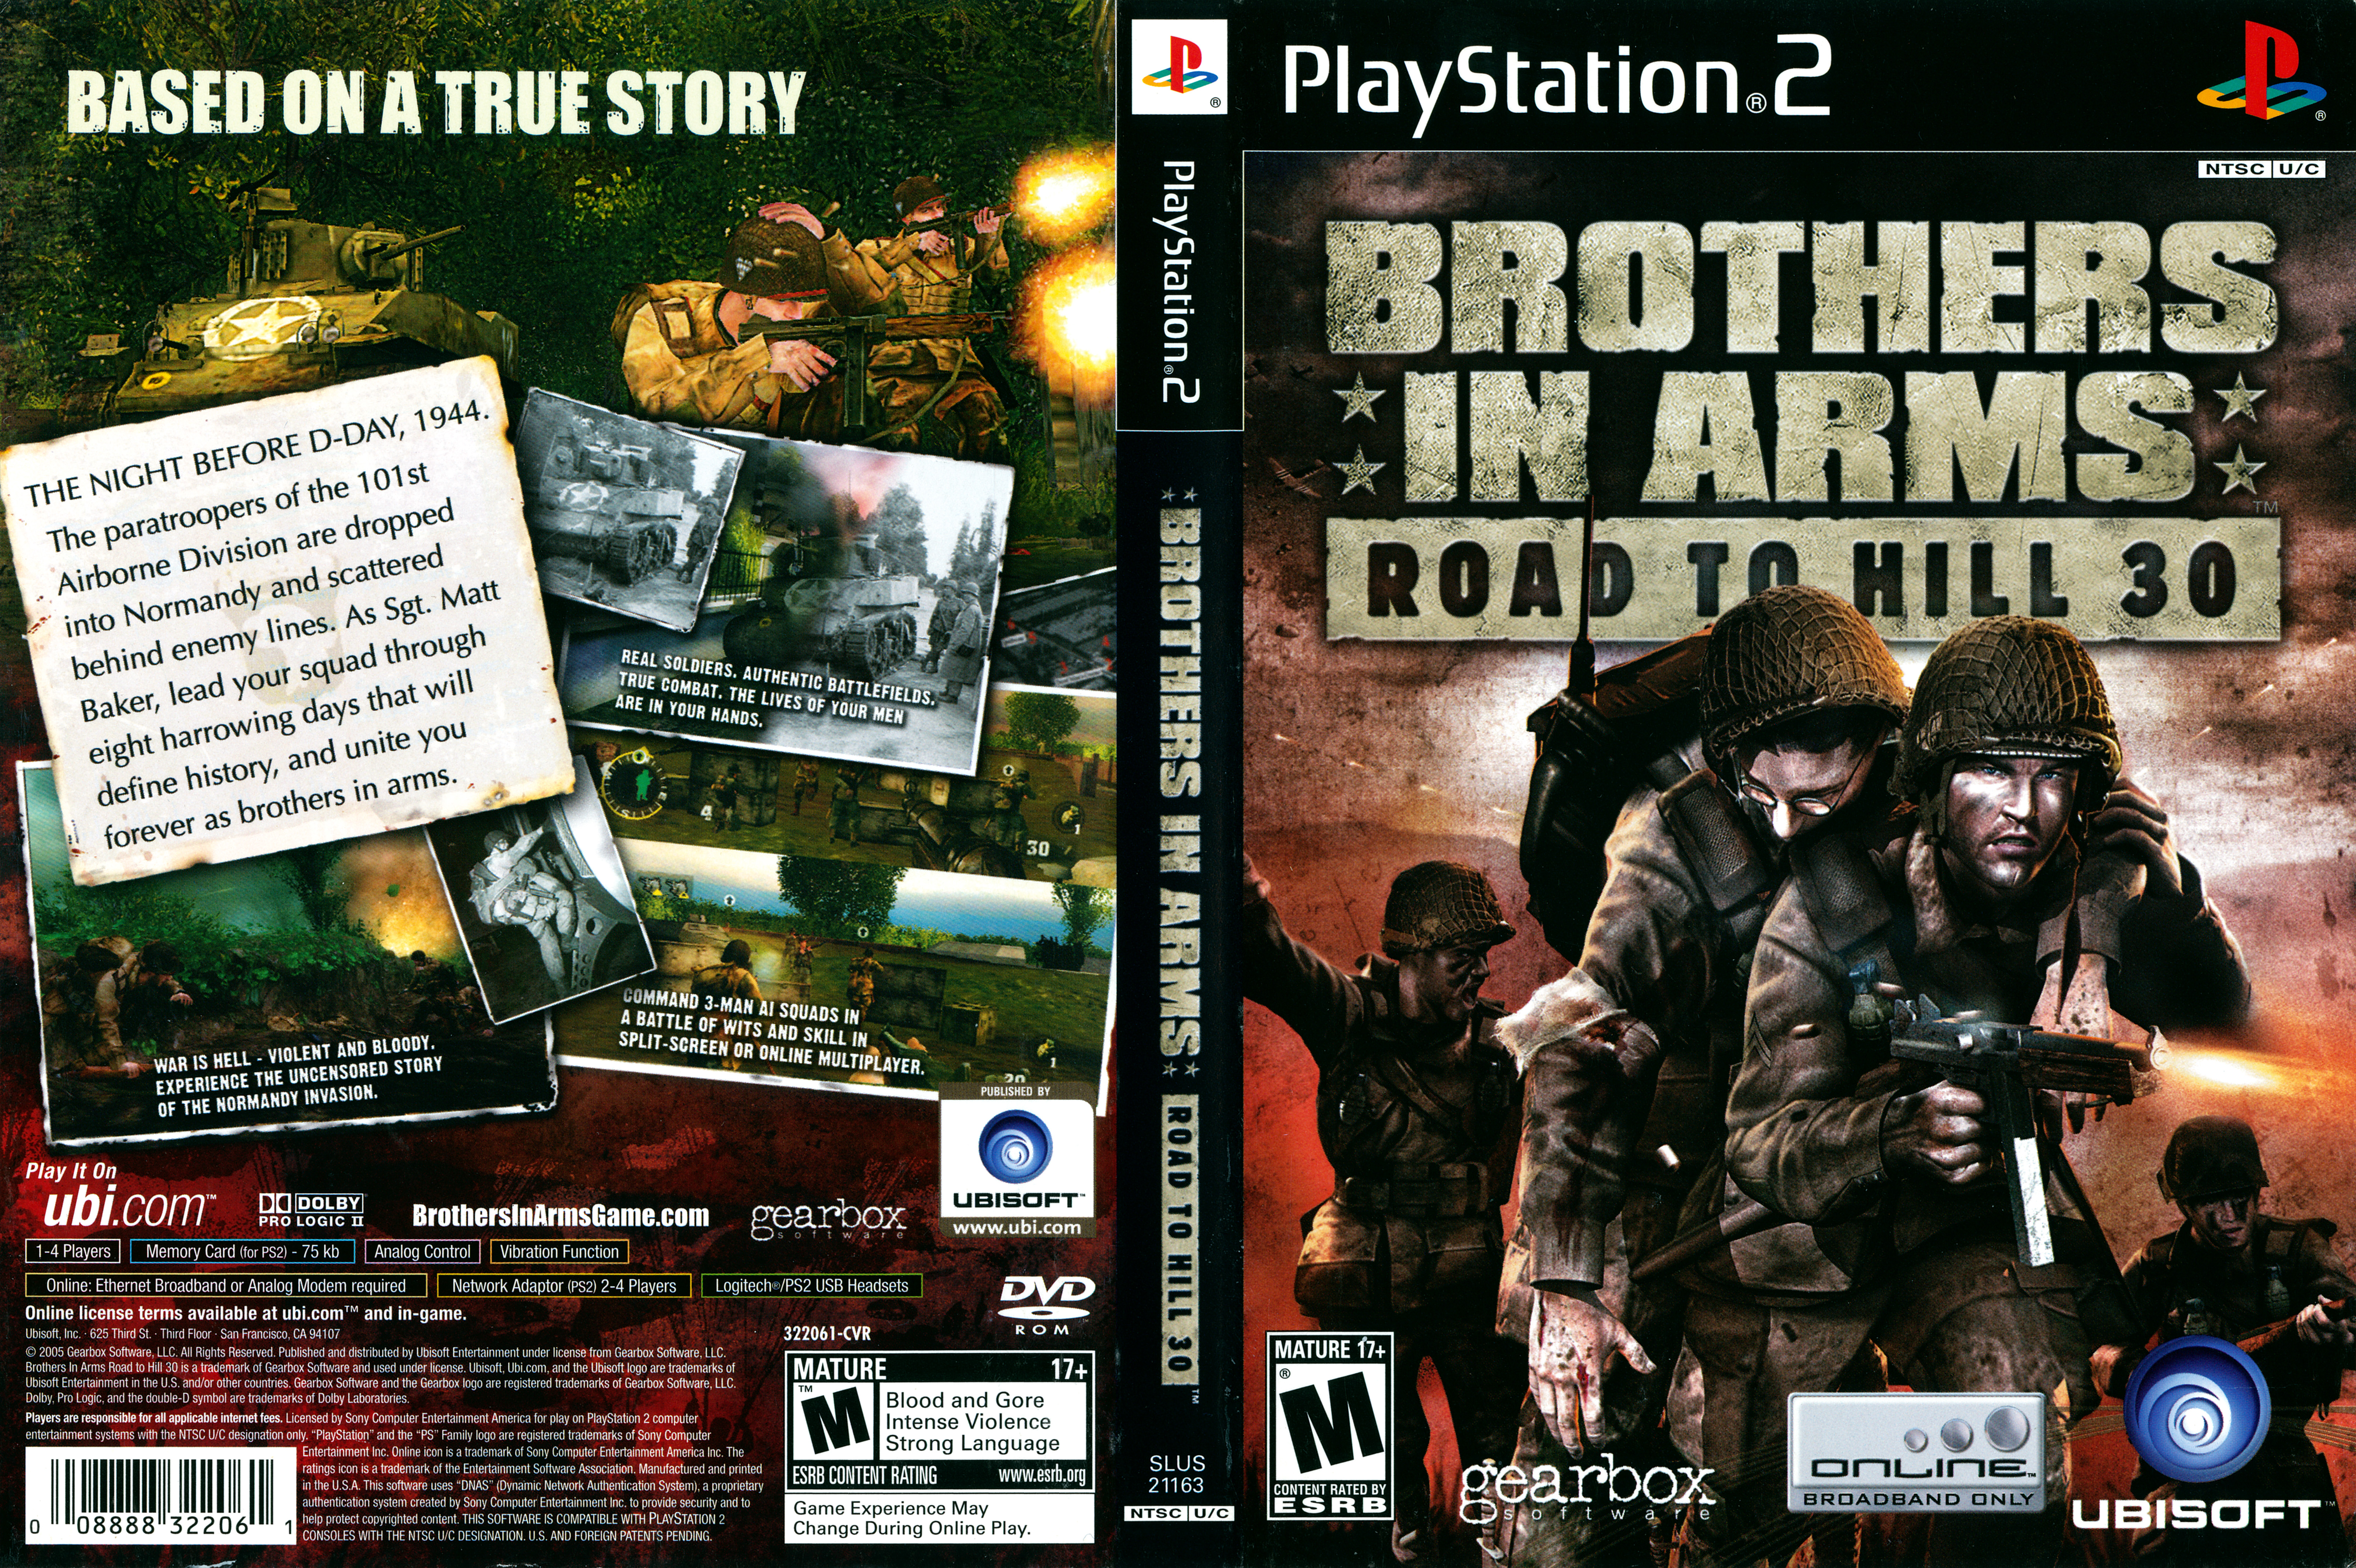 Brothers In Arms - Road To Hill 30 [SLUS 21163] (Sony Playstation